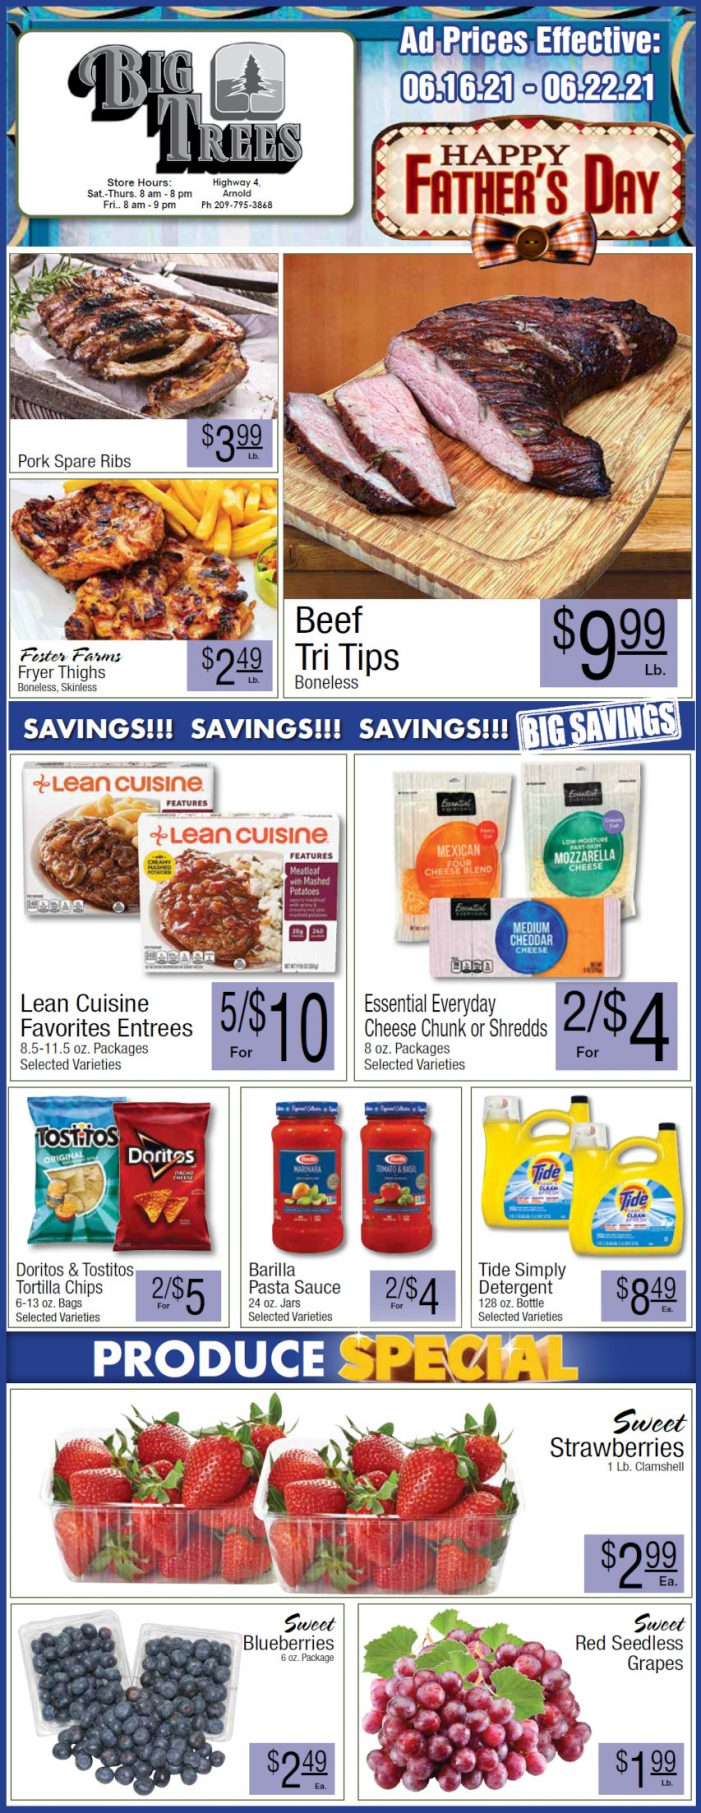 Big Trees Market Weekly Ad & Grocery Specials Through June 22nd! Shop Local & Save!!